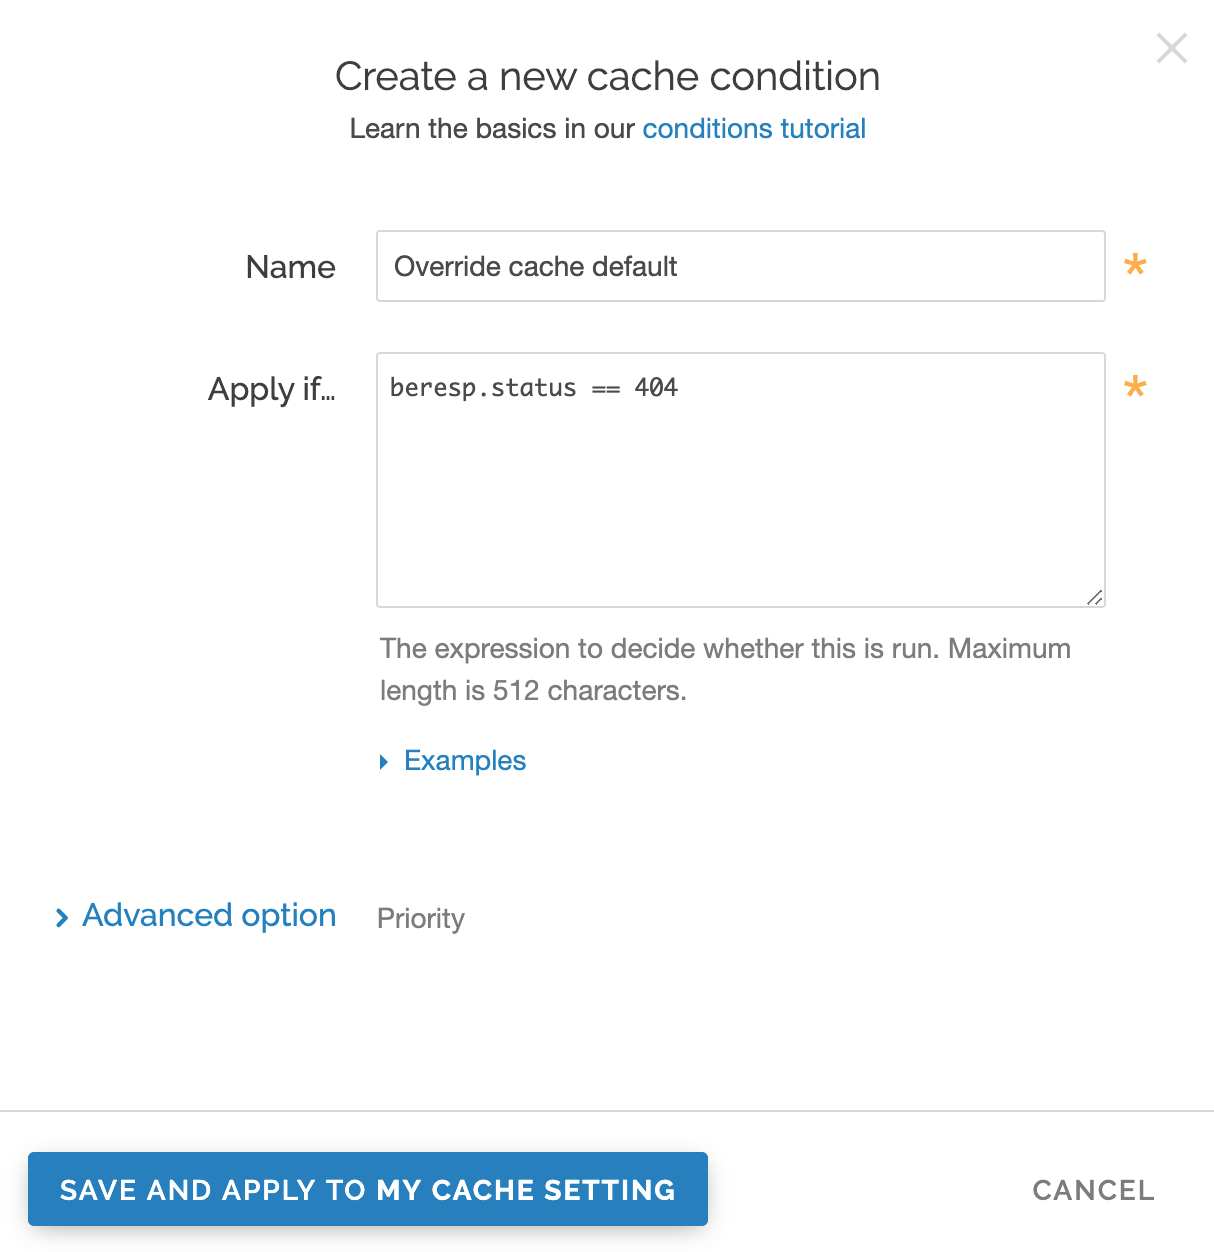 the Create new cache condition page